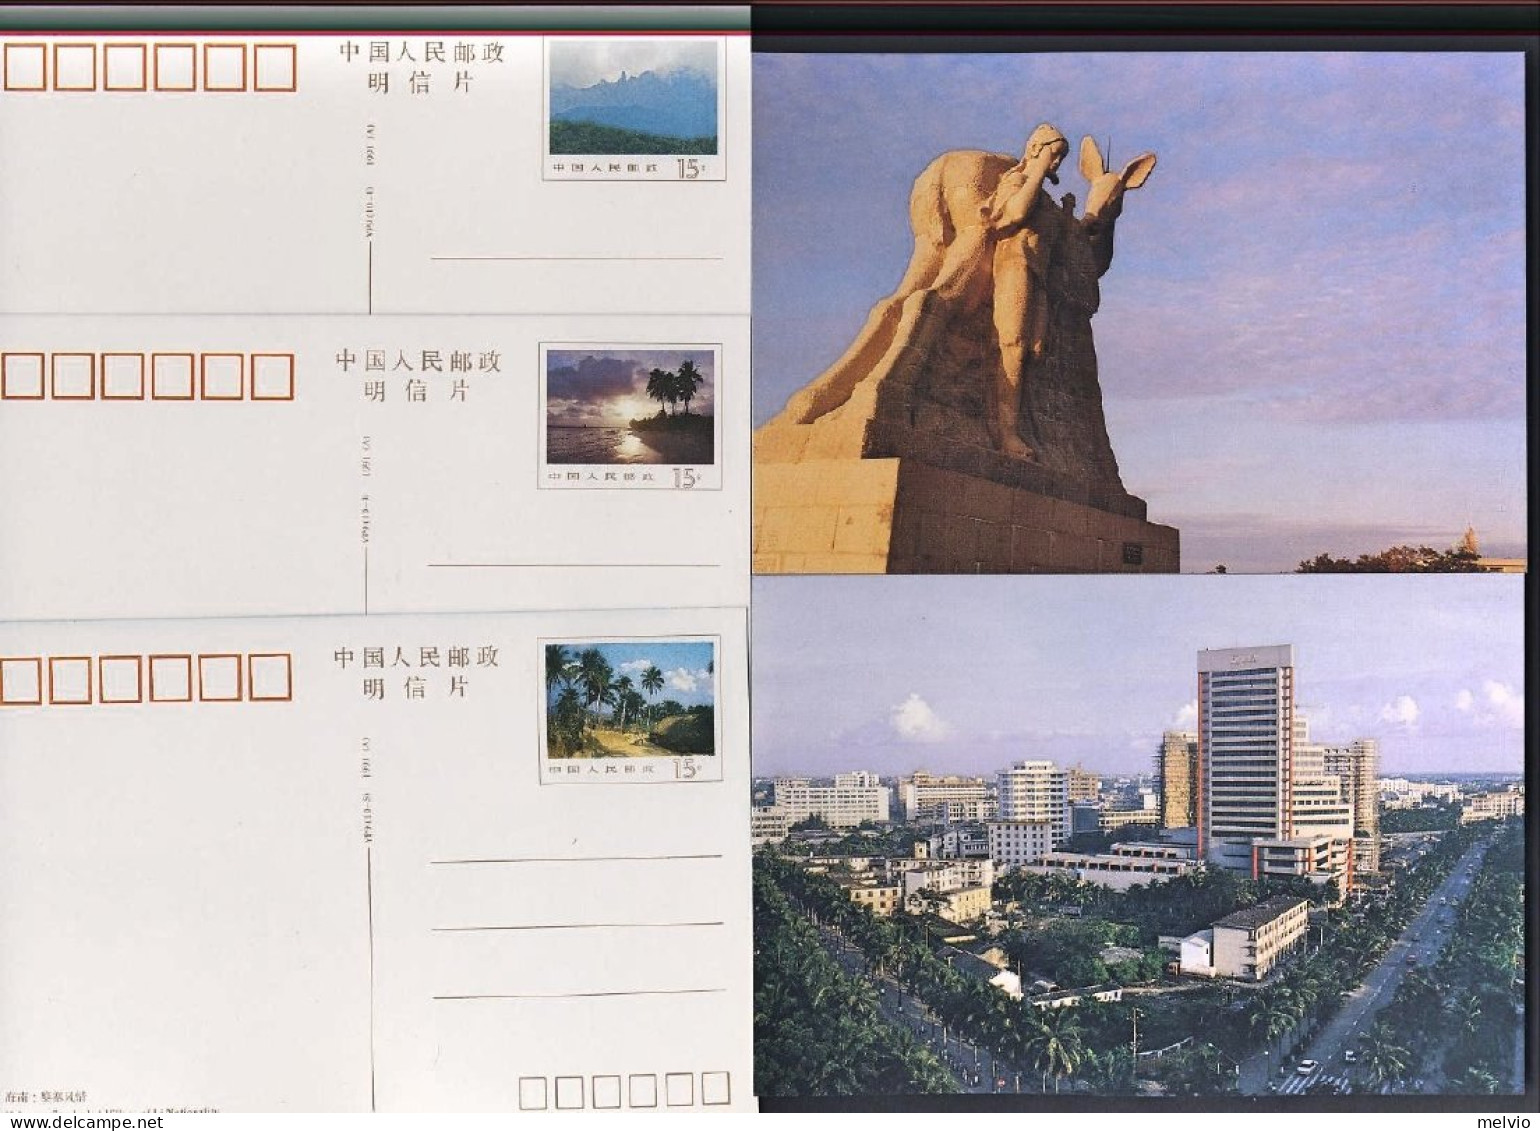 1991-Cina China A Complete Set Of 10 Mint Uncirculated Pre-stamped Postcards Fea - Brieven En Documenten